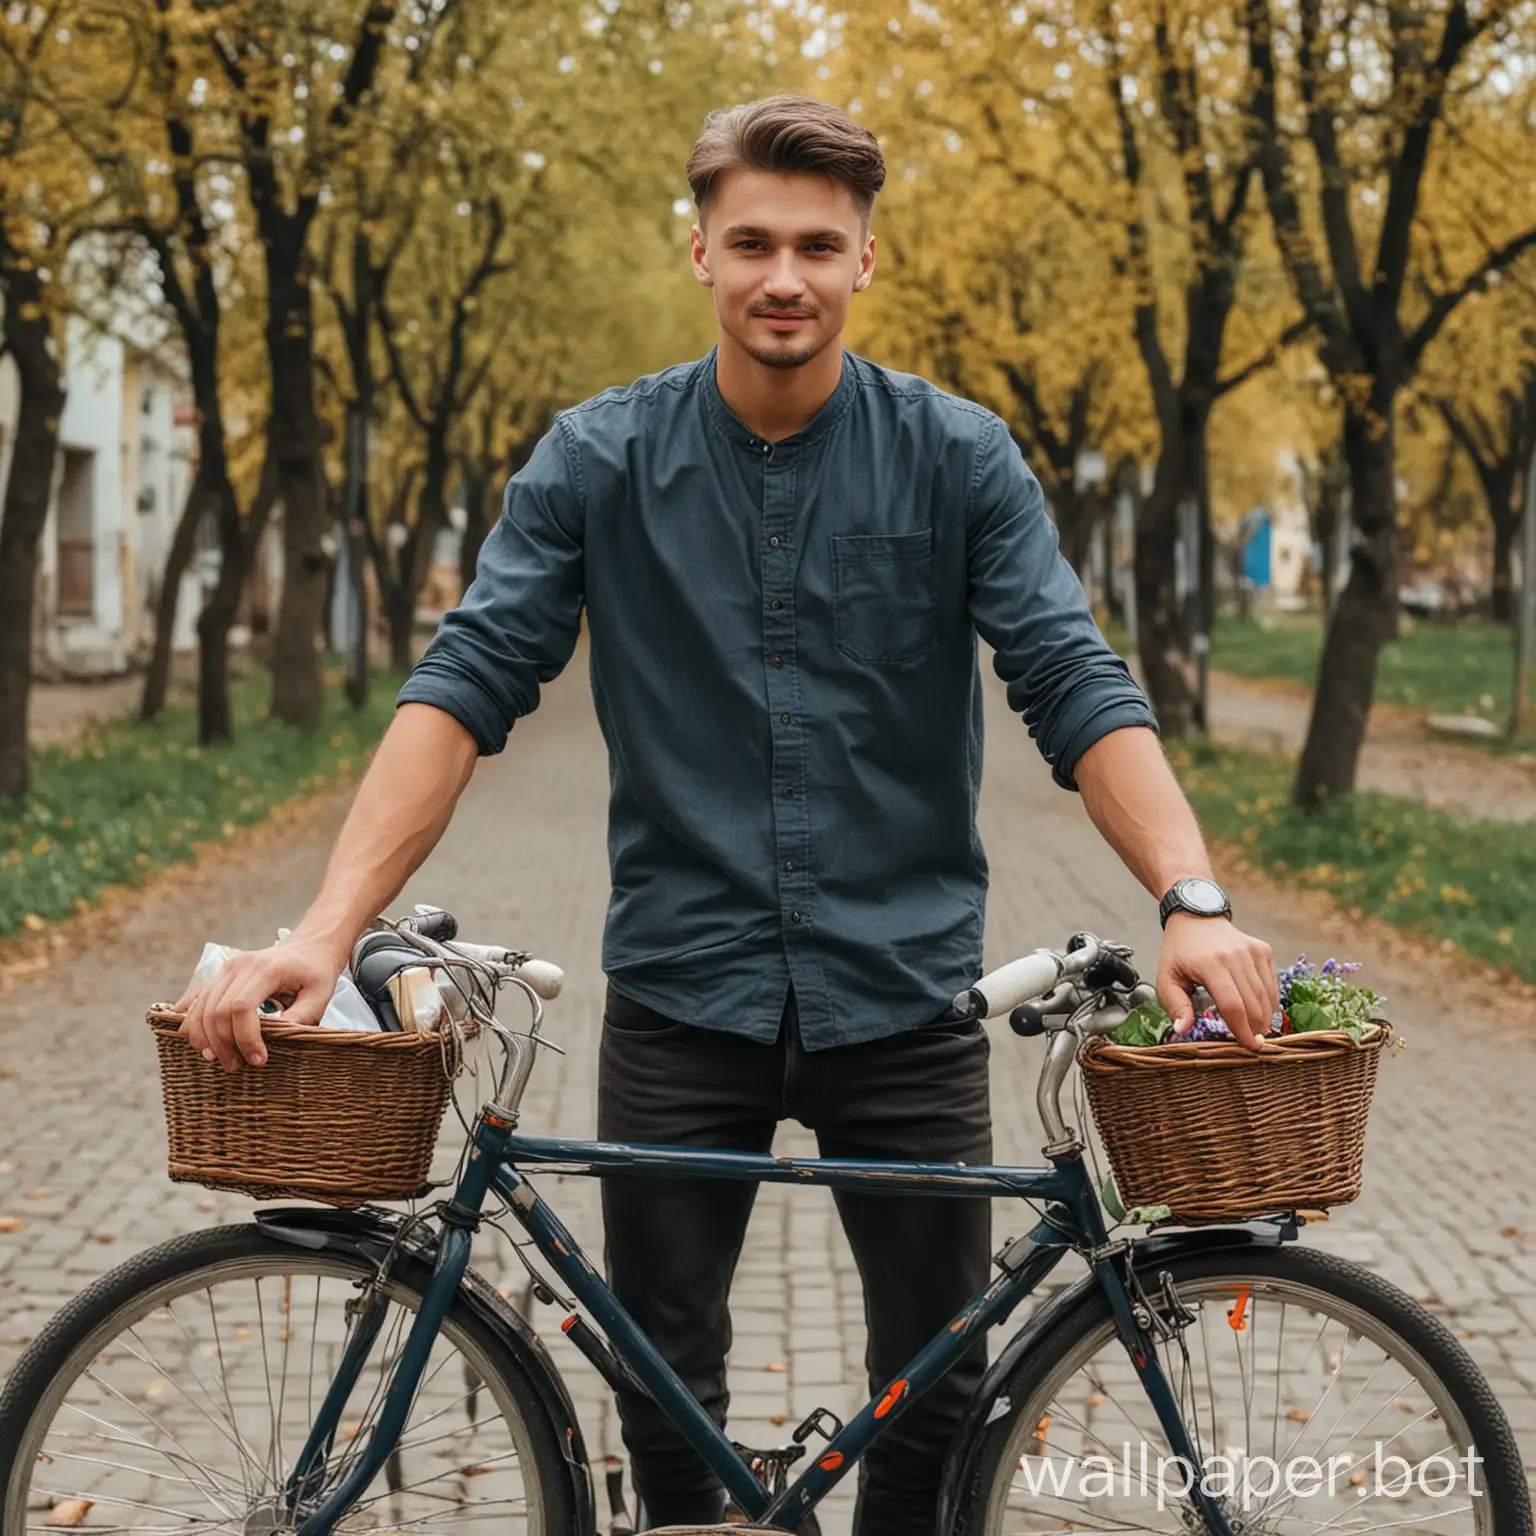 Handsome-Ukrainian-Guy-Riding-Bicycle-Through-Vibrant-City-Streets